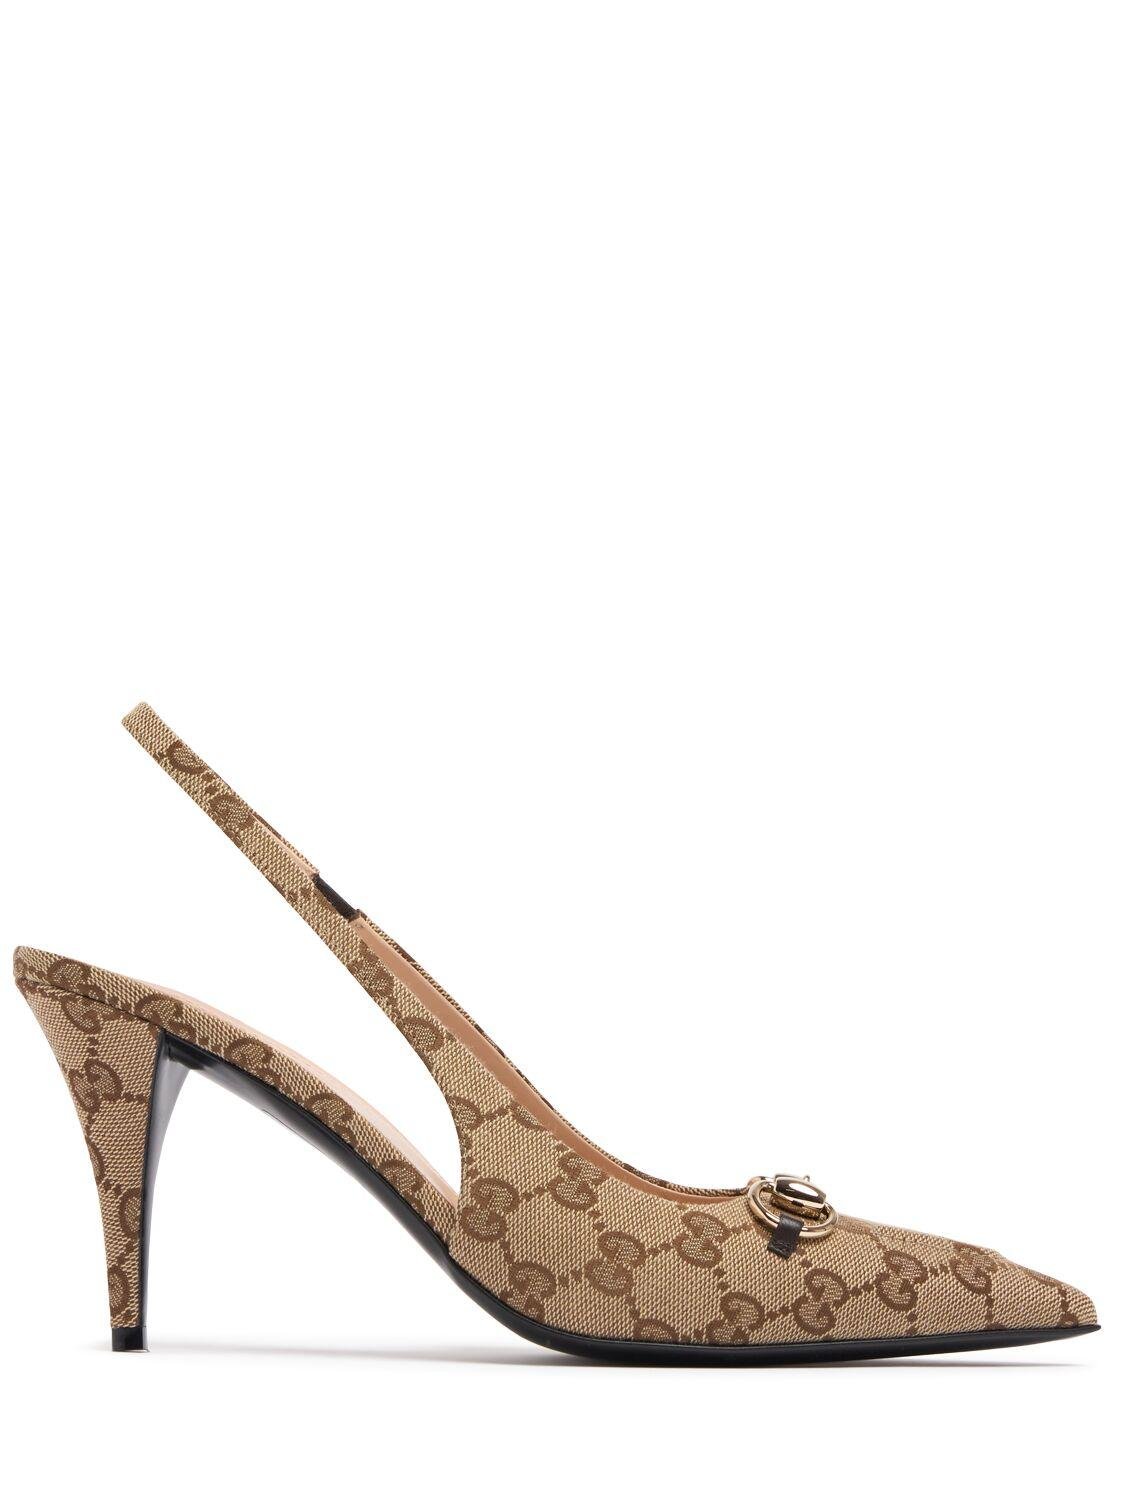 85mm Erin Gg Canvas Slingback Pumps by GUCCI